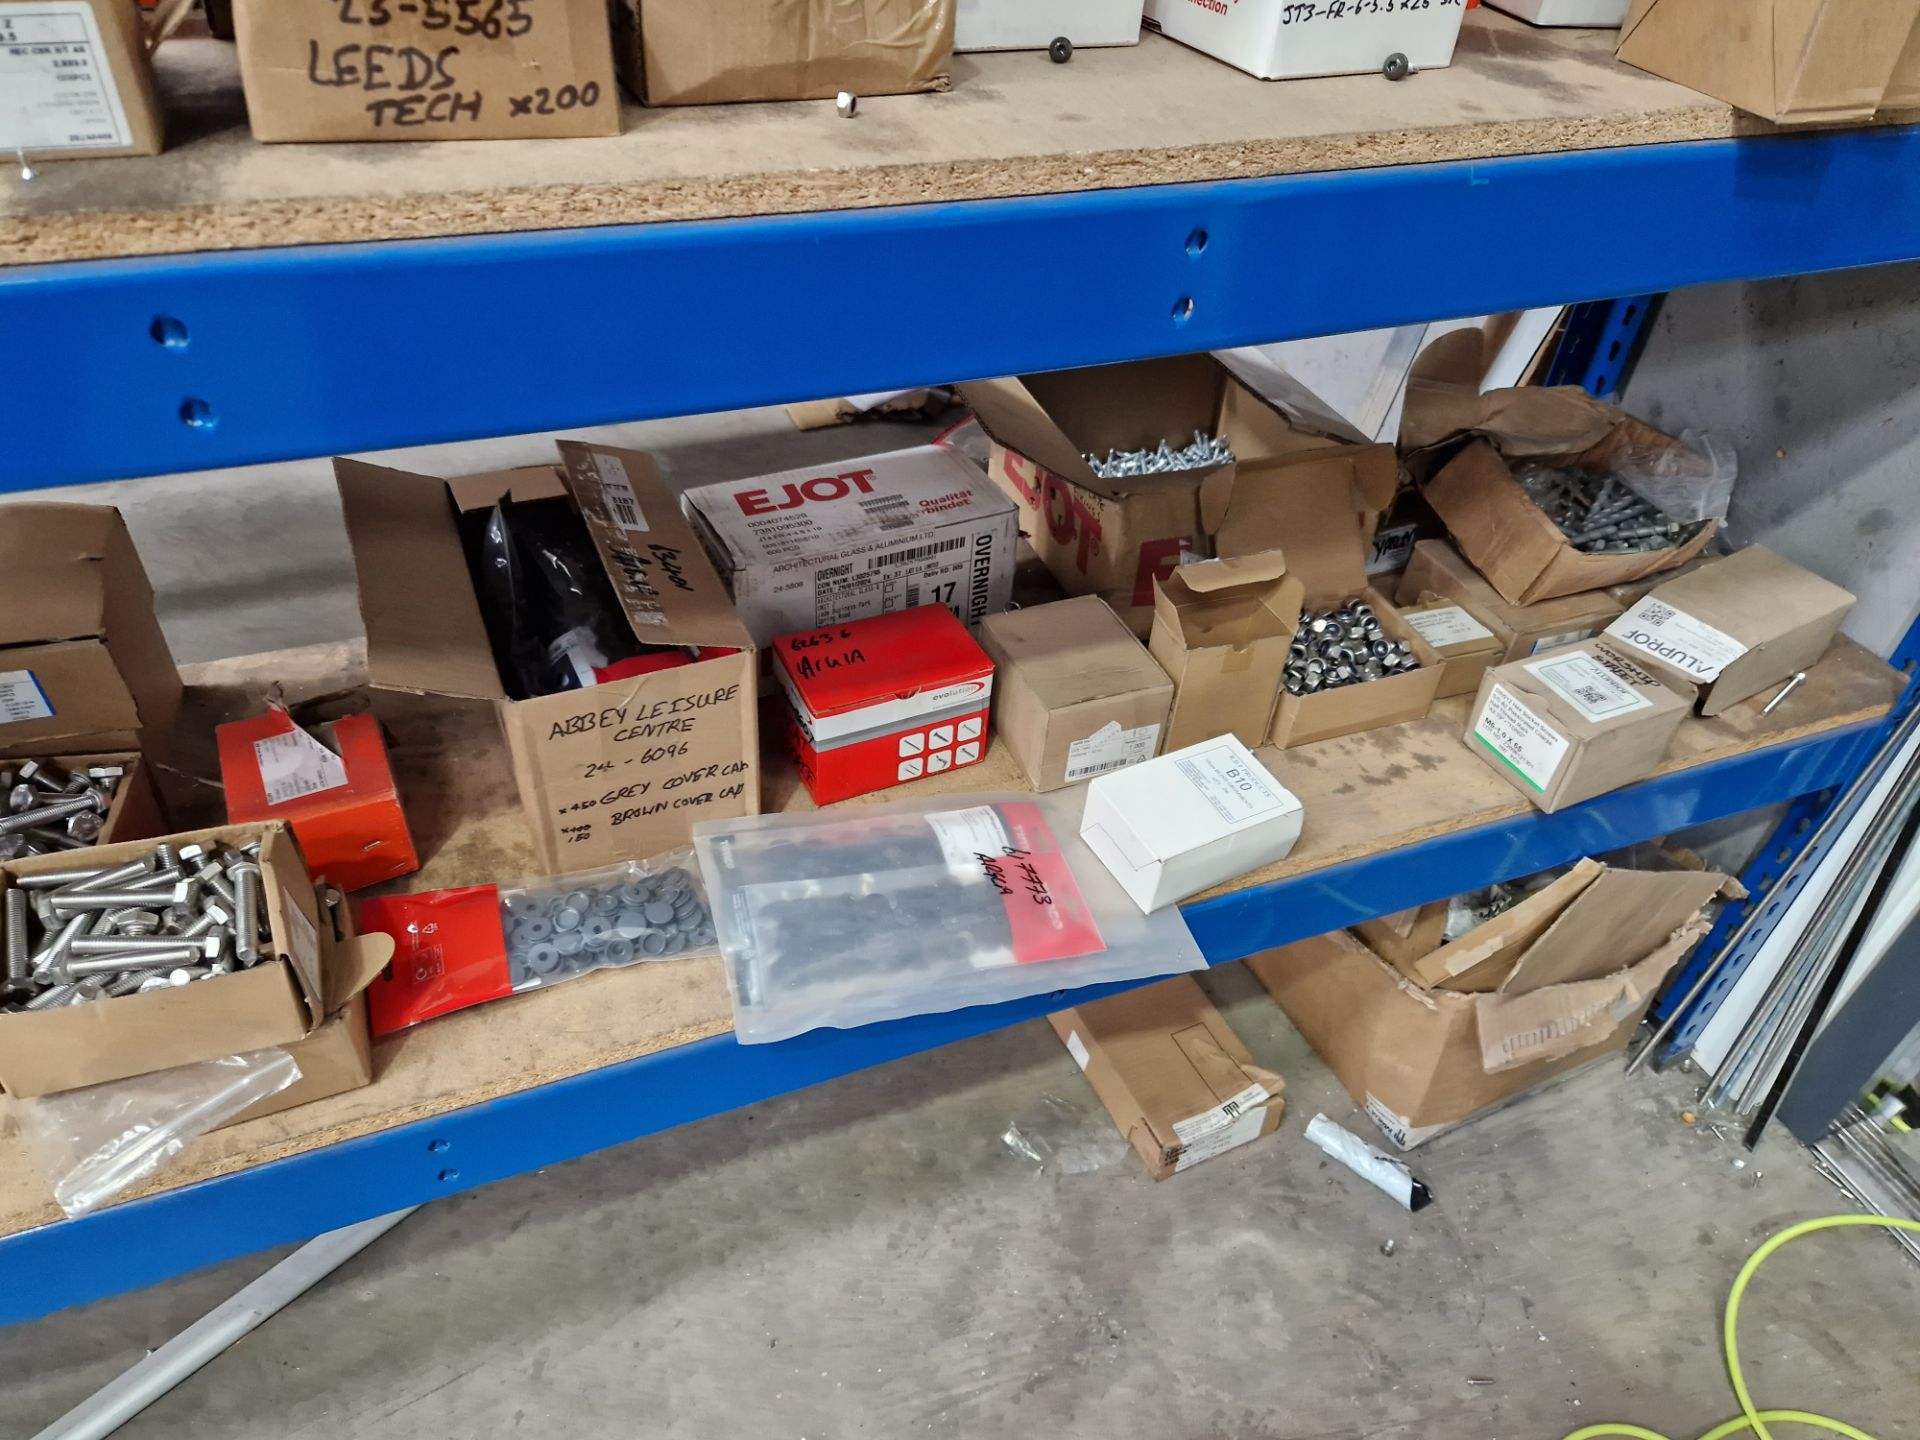 Fixtures and Fittings Contents to One Bay of Racking, including Nuts, Bolts, Rivets, Screws, etc - Image 3 of 7